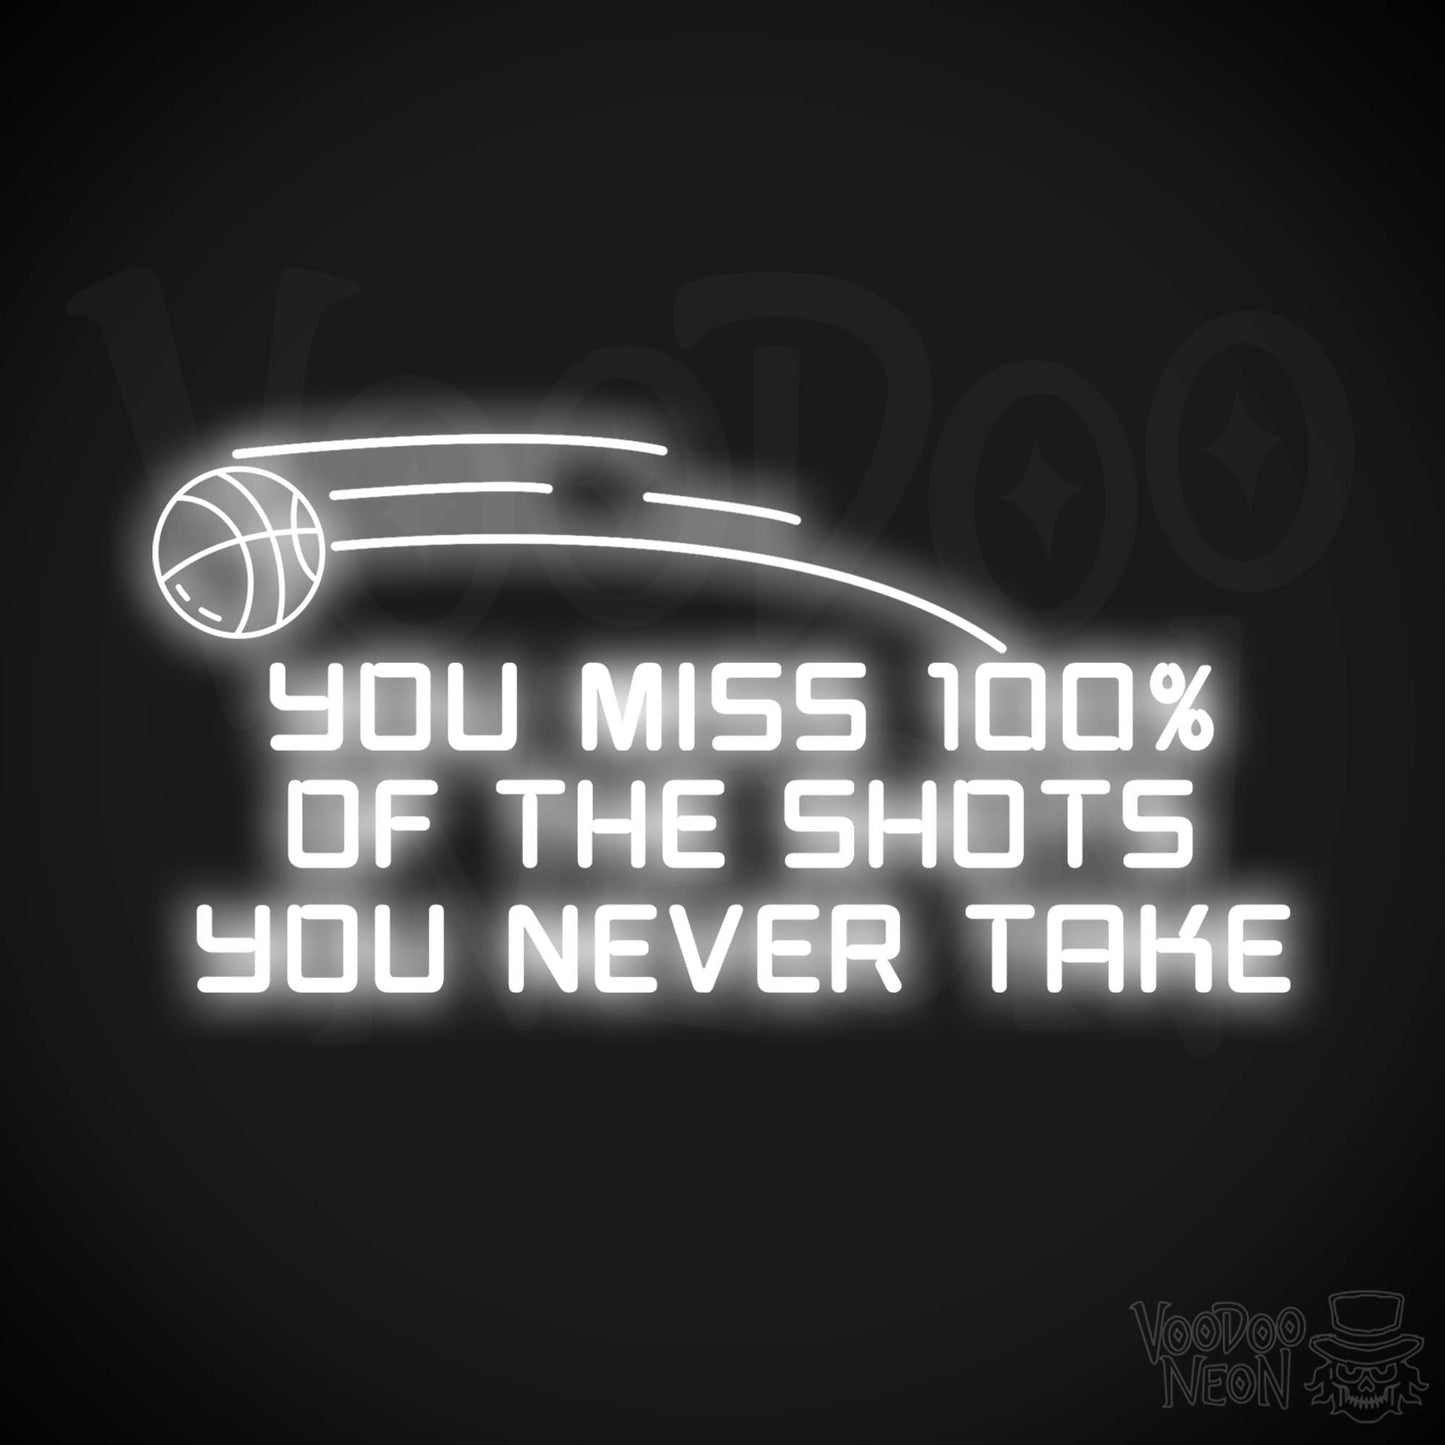 You Miss 100% of the Shots You Never Take Neon Sign - Neon Wall Art - Inspirational Signs - Color White